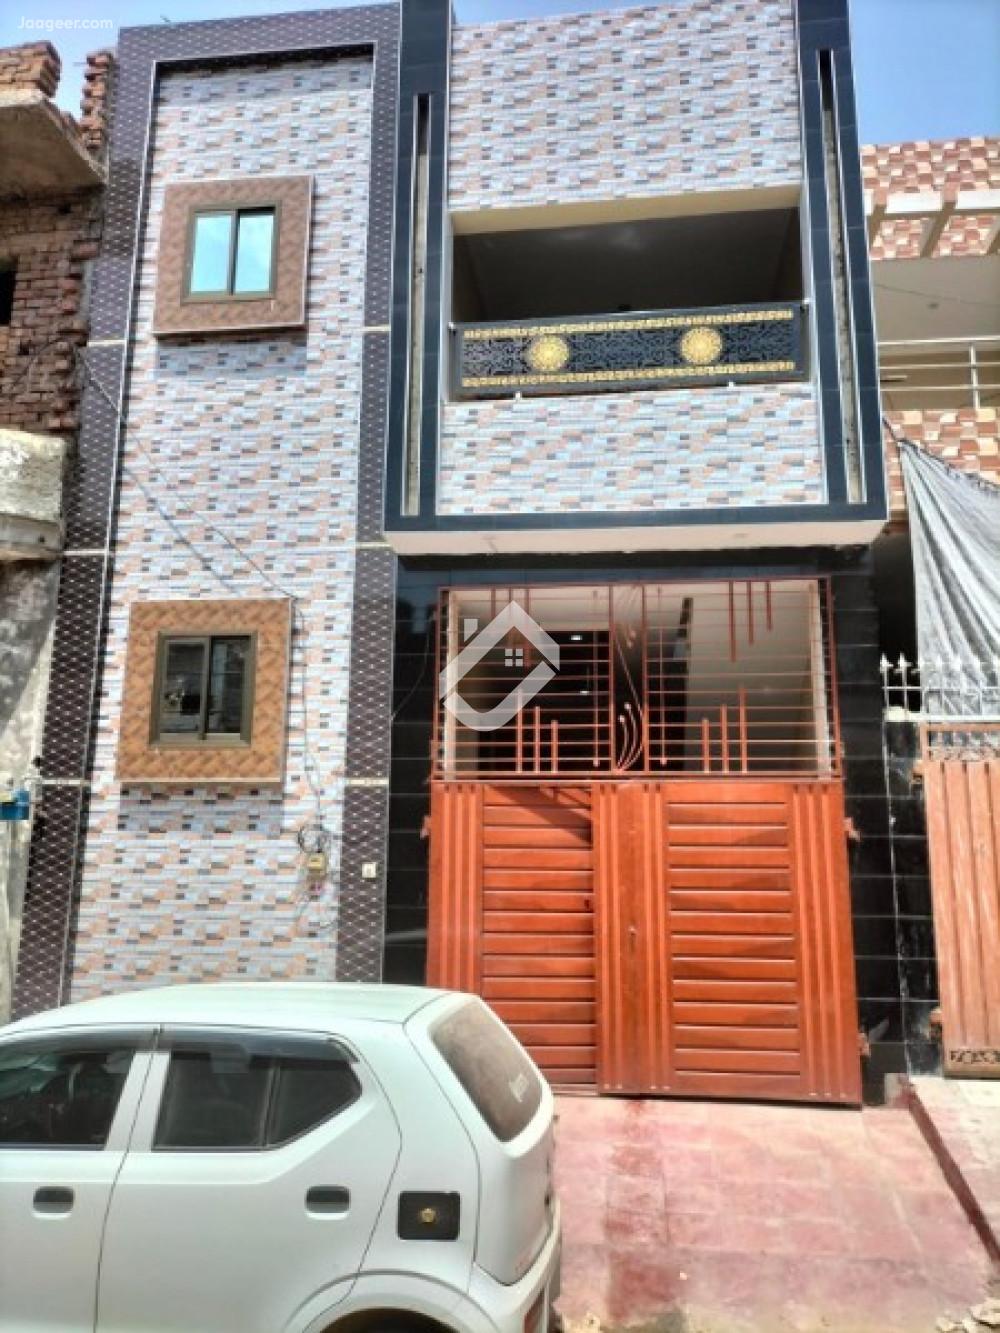 Main image 3 Marla Double Storey House For Sale In Gulberg City New Satellite Town  New Satellite Town Z Block